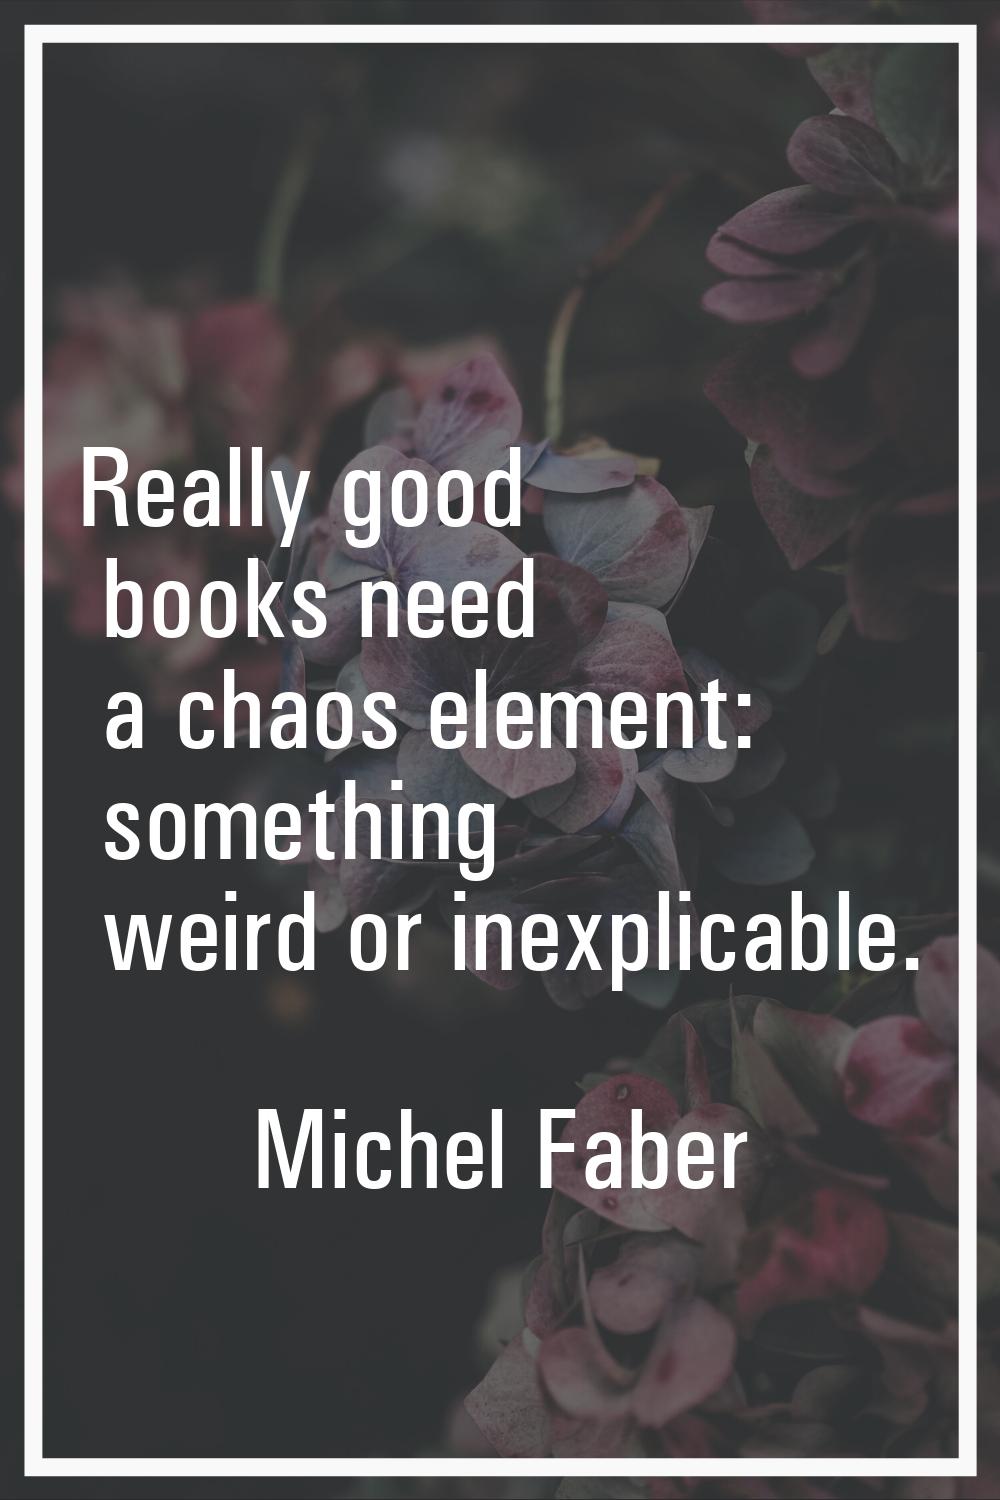 Really good books need a chaos element: something weird or inexplicable.